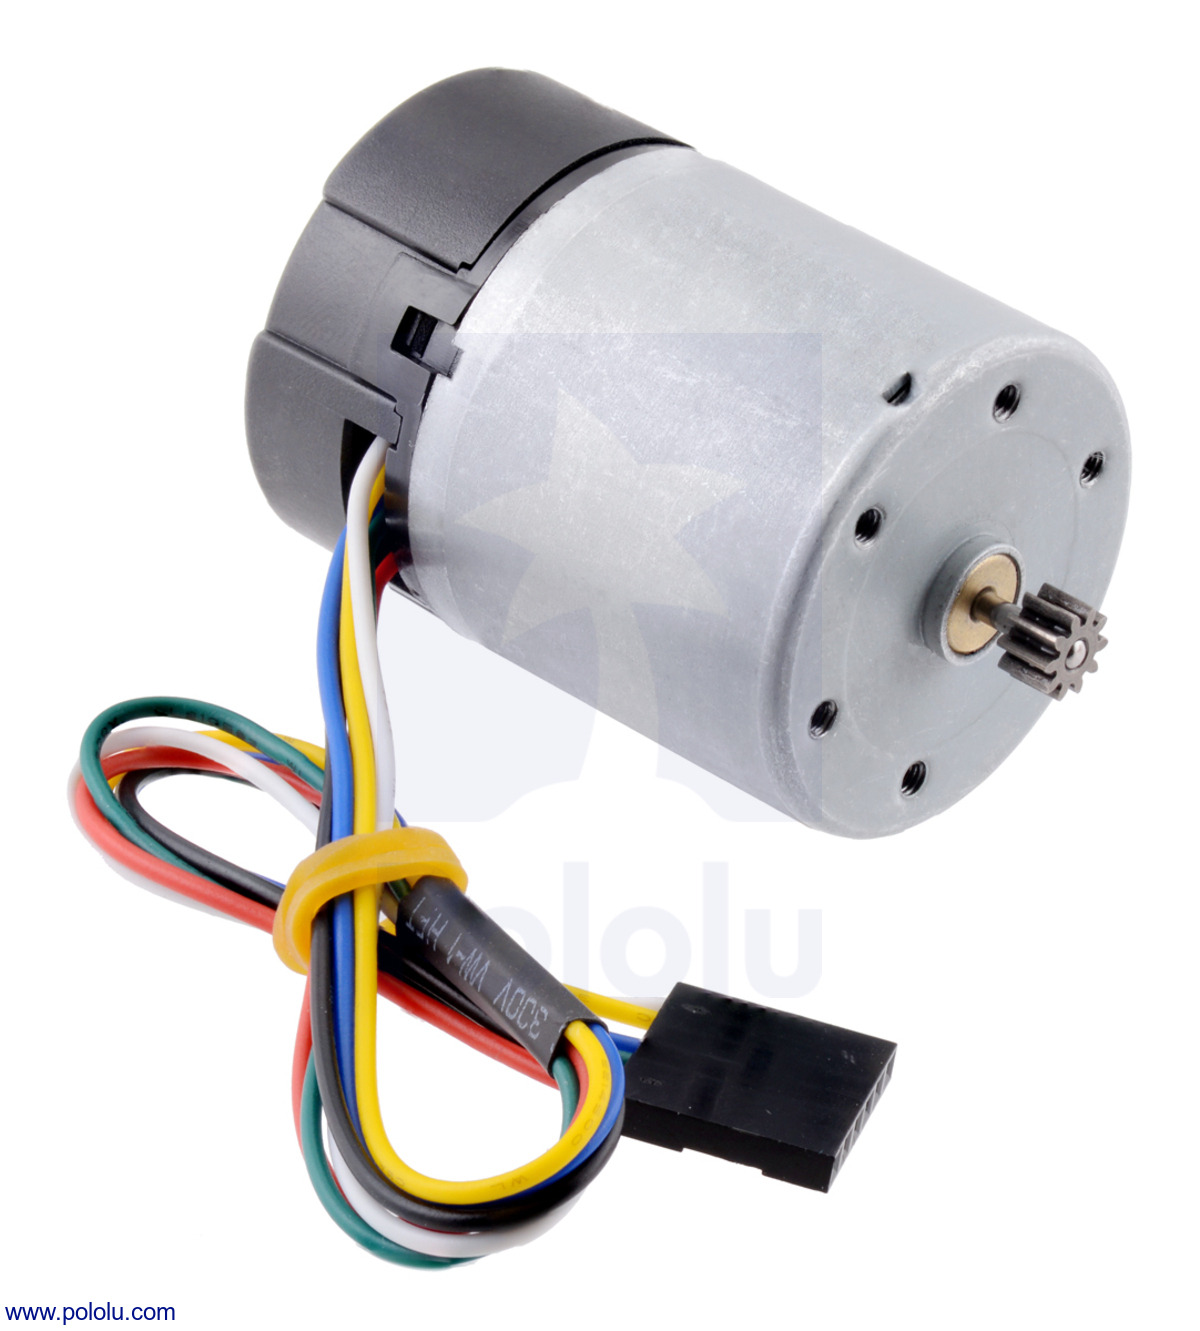 12V Motor with 64 CPR Encoder for 37D mm Metal Gearmotors (No Gearbox, Spur  Pinion)